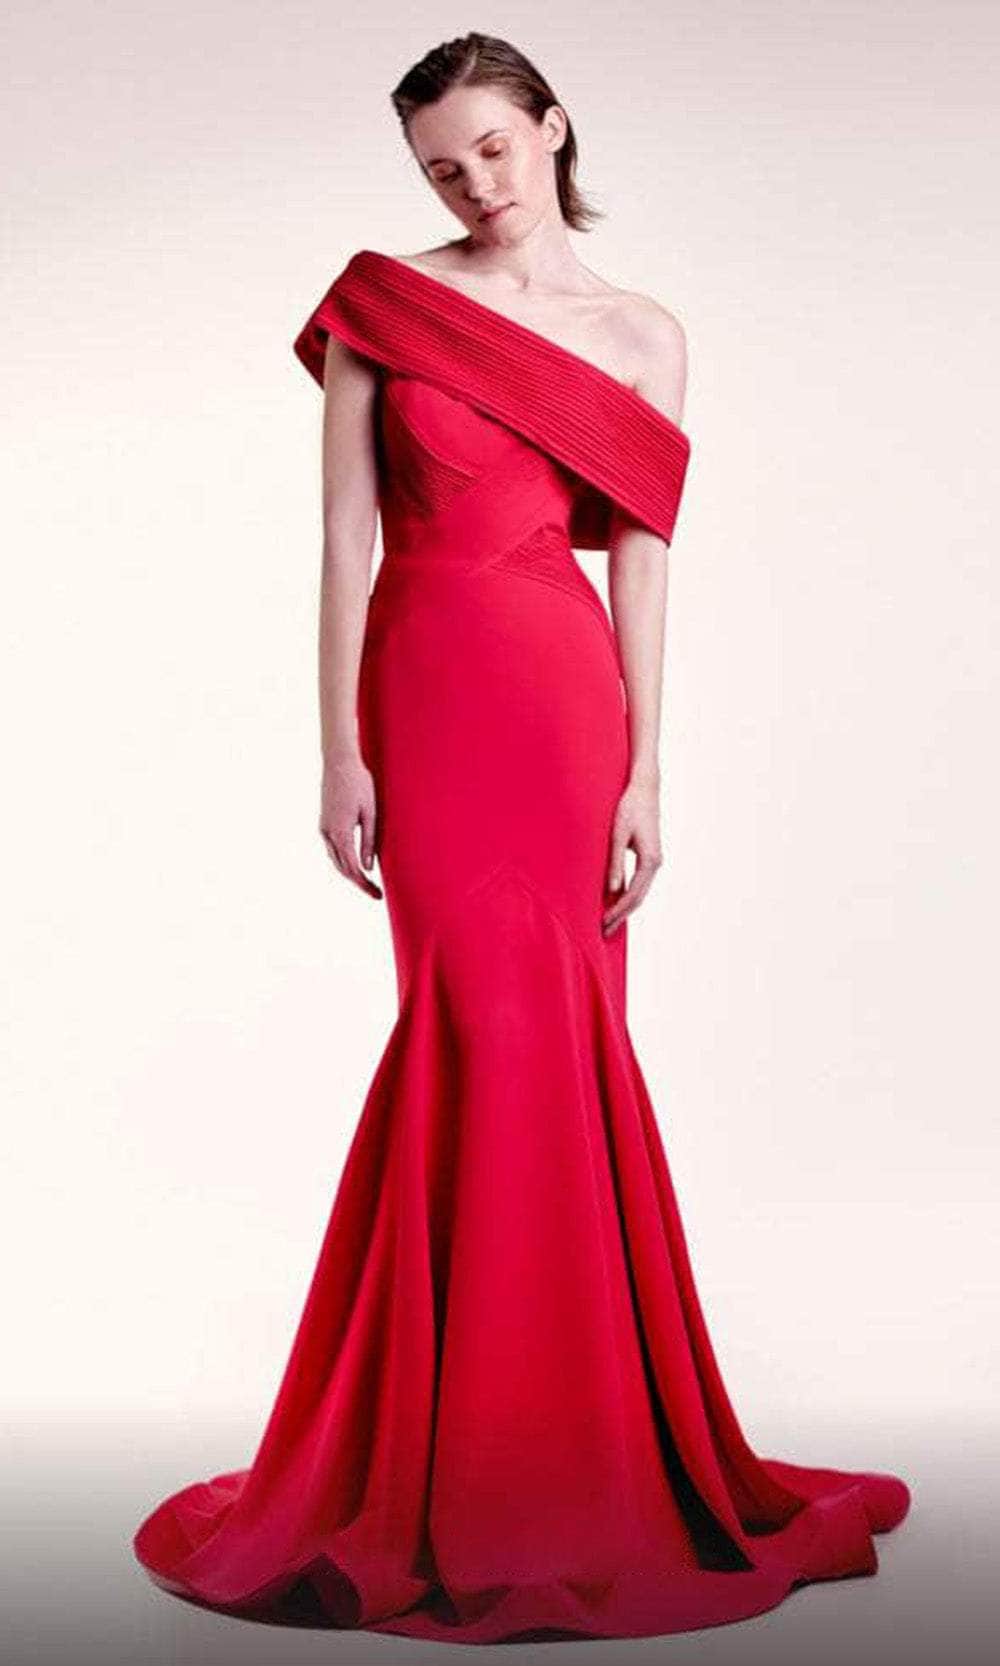 Image of MNM Couture G1430 - Asymmetric Mermaid Evening Dress